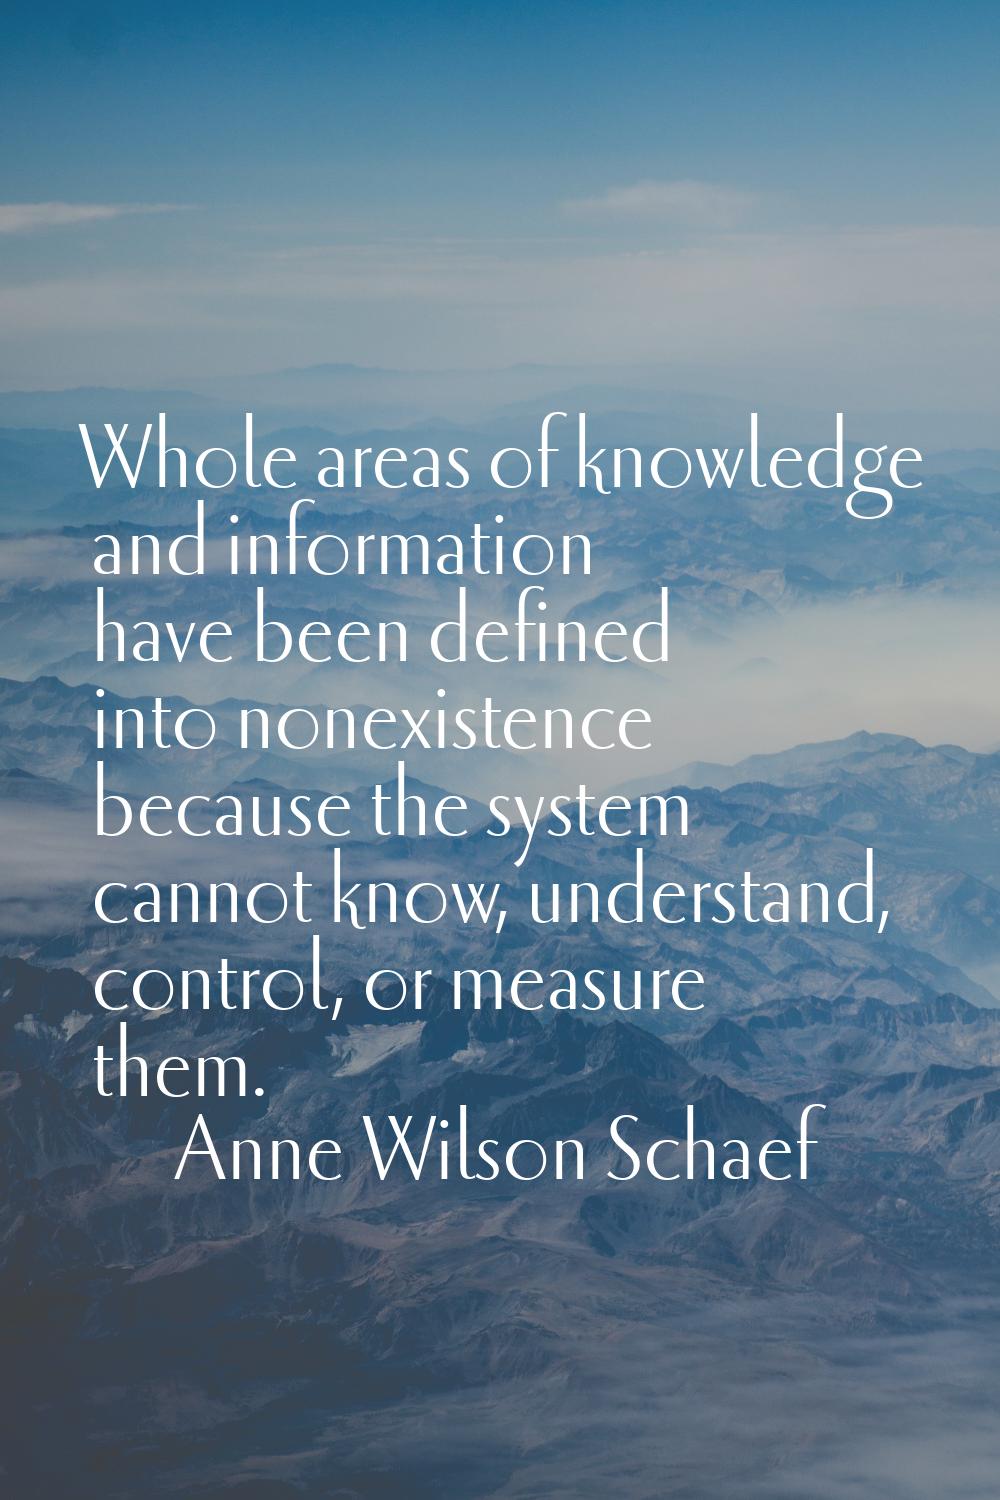 Whole areas of knowledge and information have been defined into nonexistence because the system can